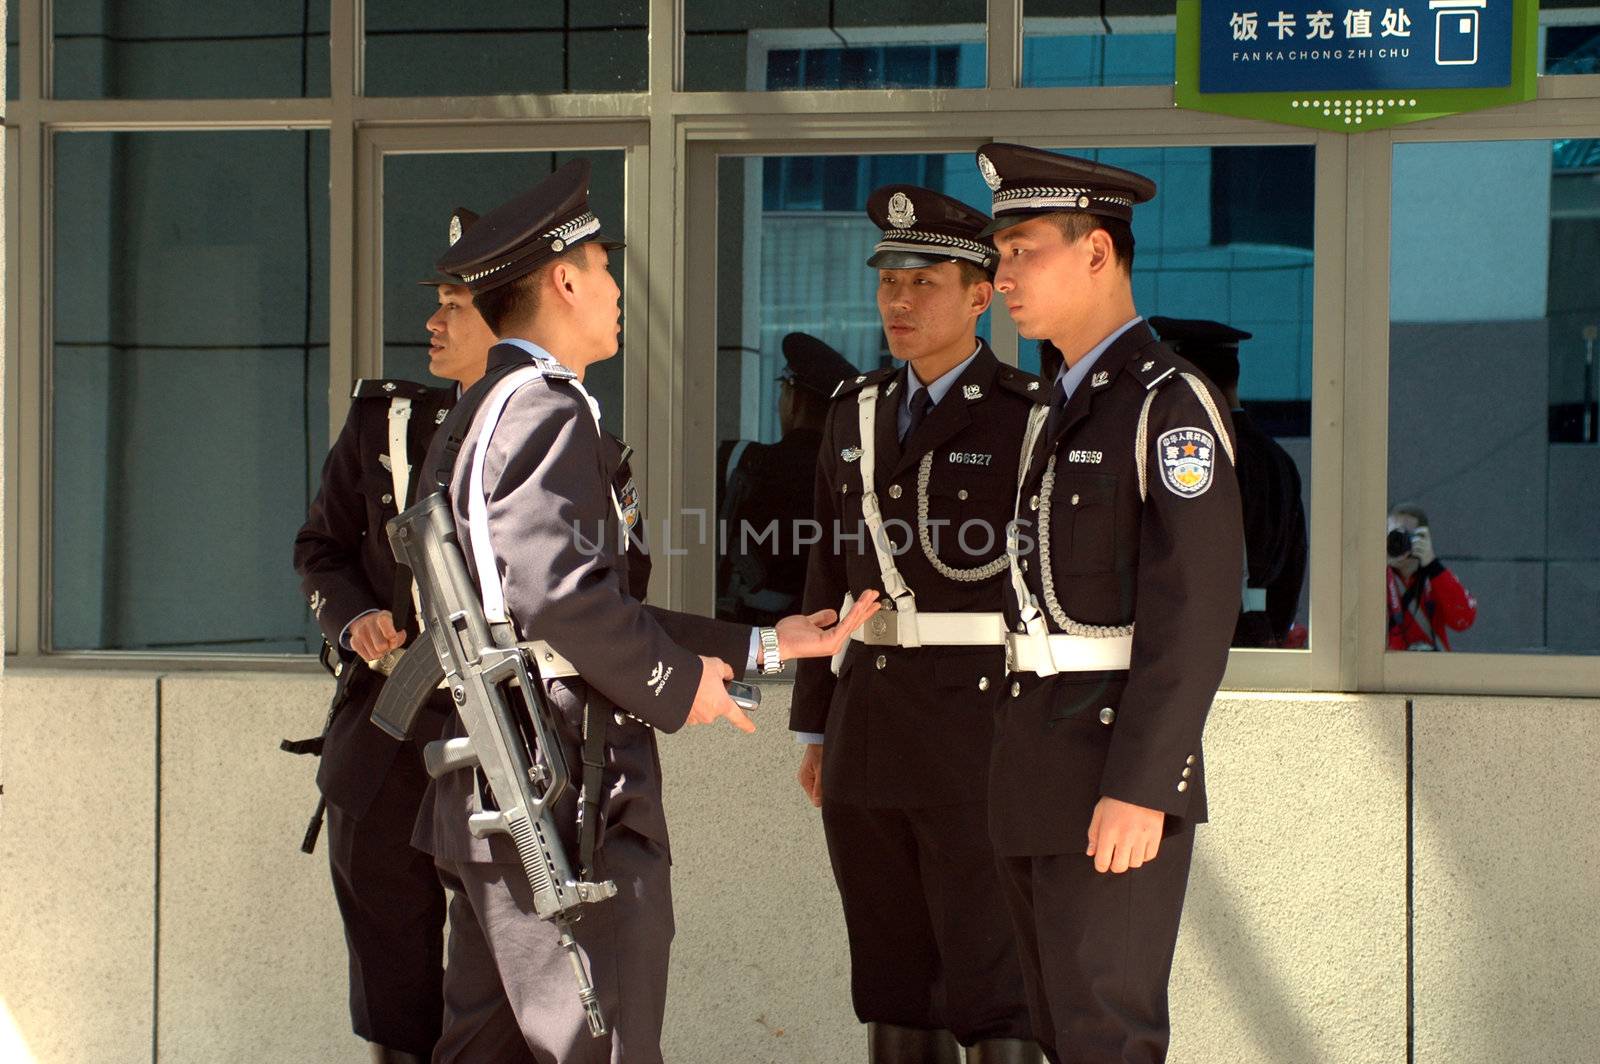 CHINA, SHENZHEN - MARCH 2, 2008: Chinese policeman in elegant uniform durign 'Police Open Day'.